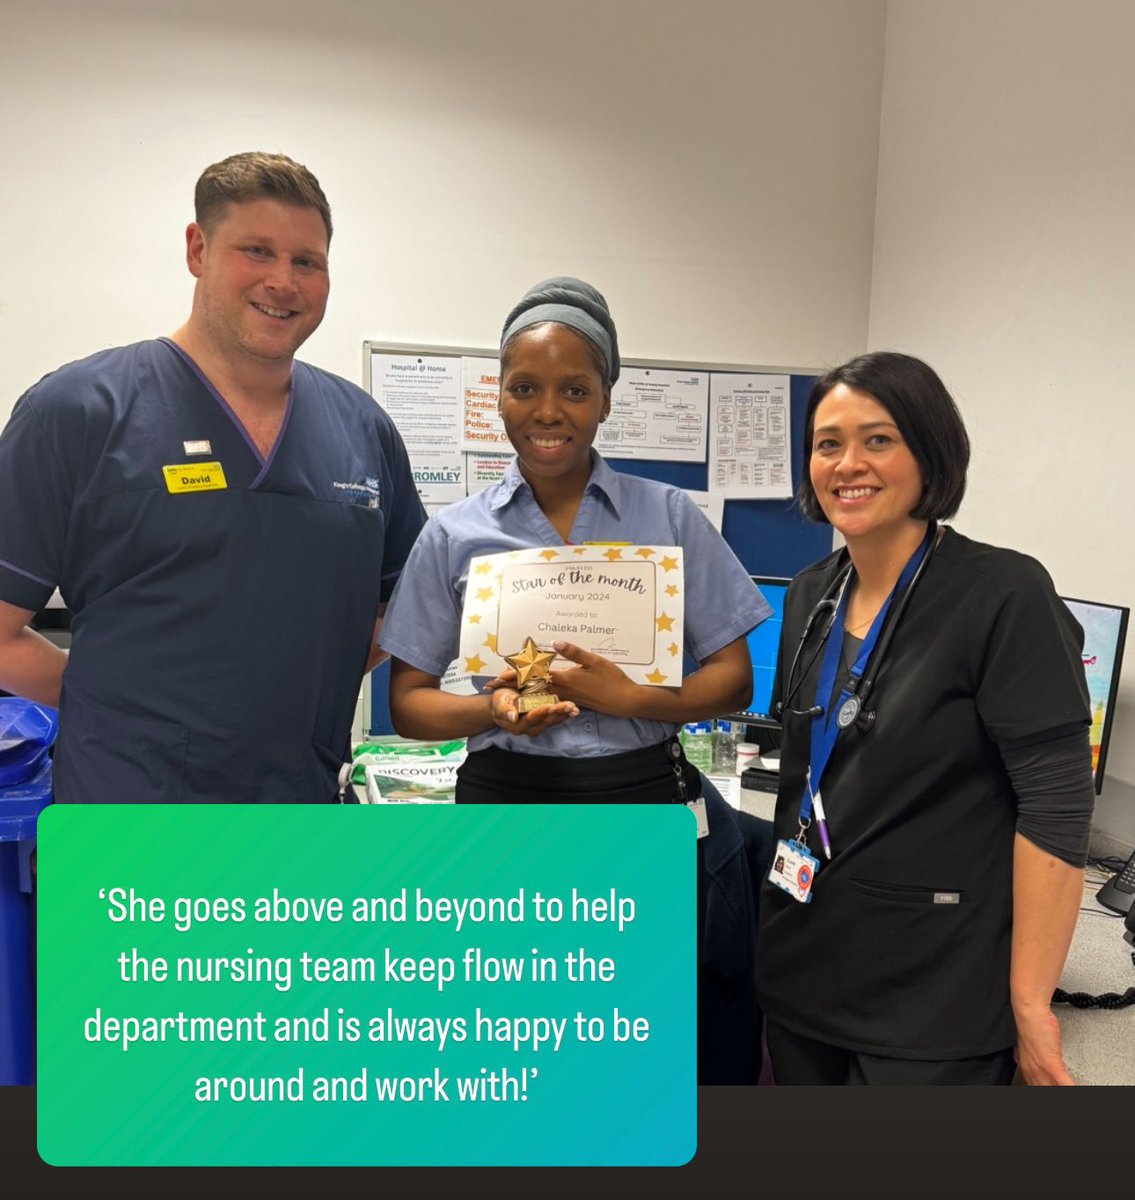 Congratulations to Chaleka one of our Patient Flow Co-ordinators who was nominated by her colleagues to win PRUH ED Star of the Month! #starofthemonth #staffappreciation